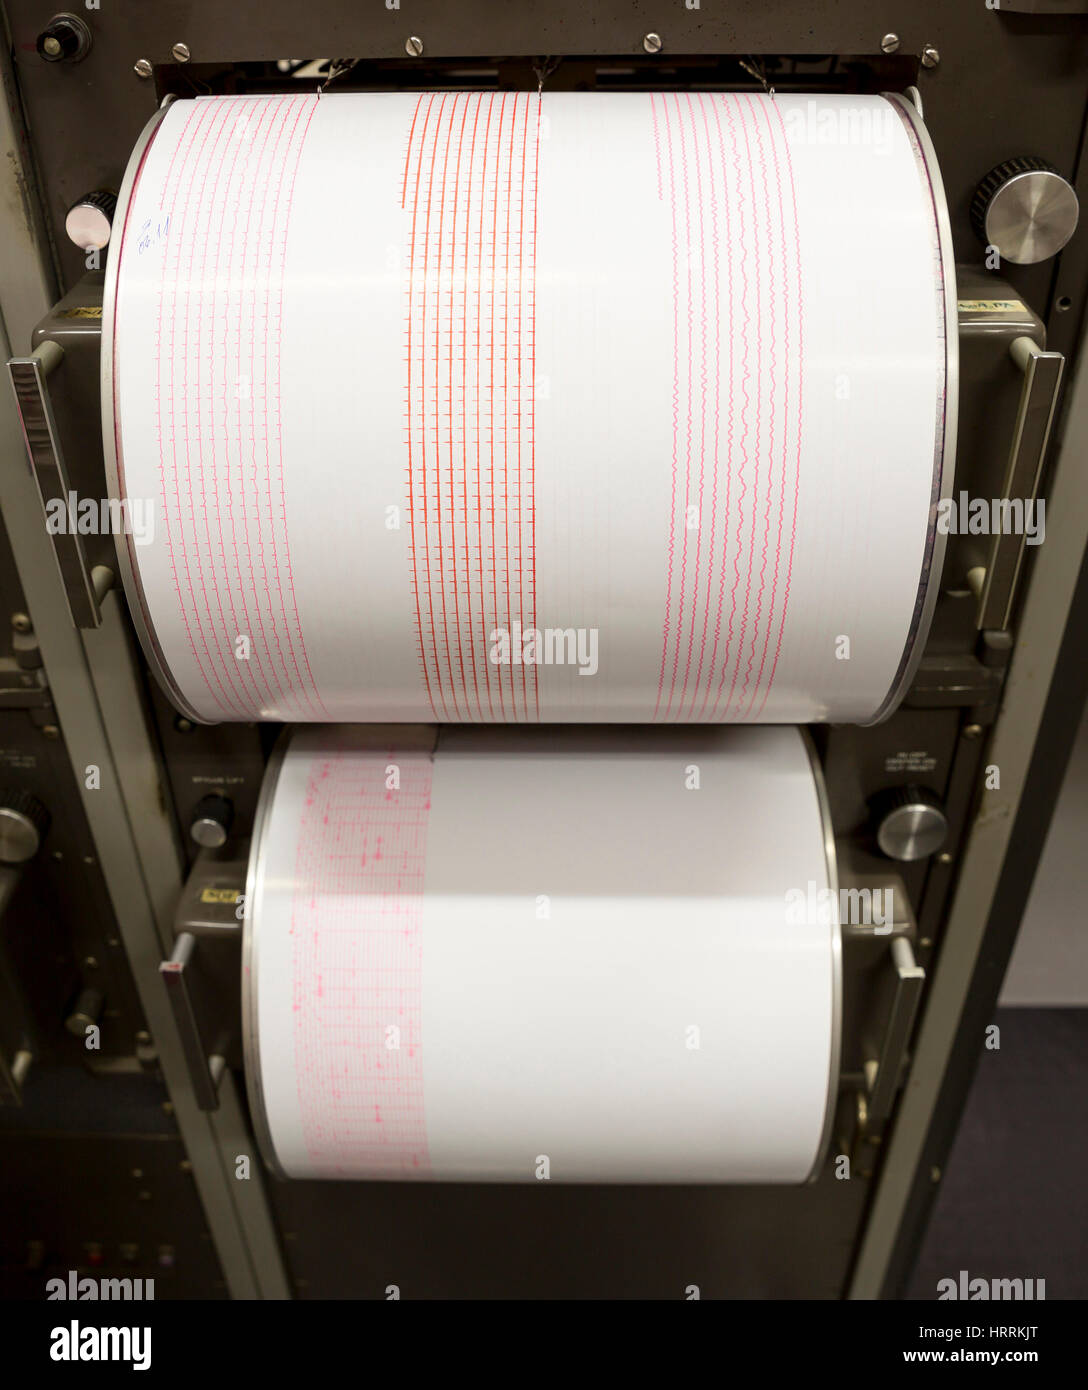 Seismograph records an earthquake on the sheet of measuring paper.  Seismological device for measuring earthquakes. Seismograph machine needle  drawing Stock Photo - Alamy